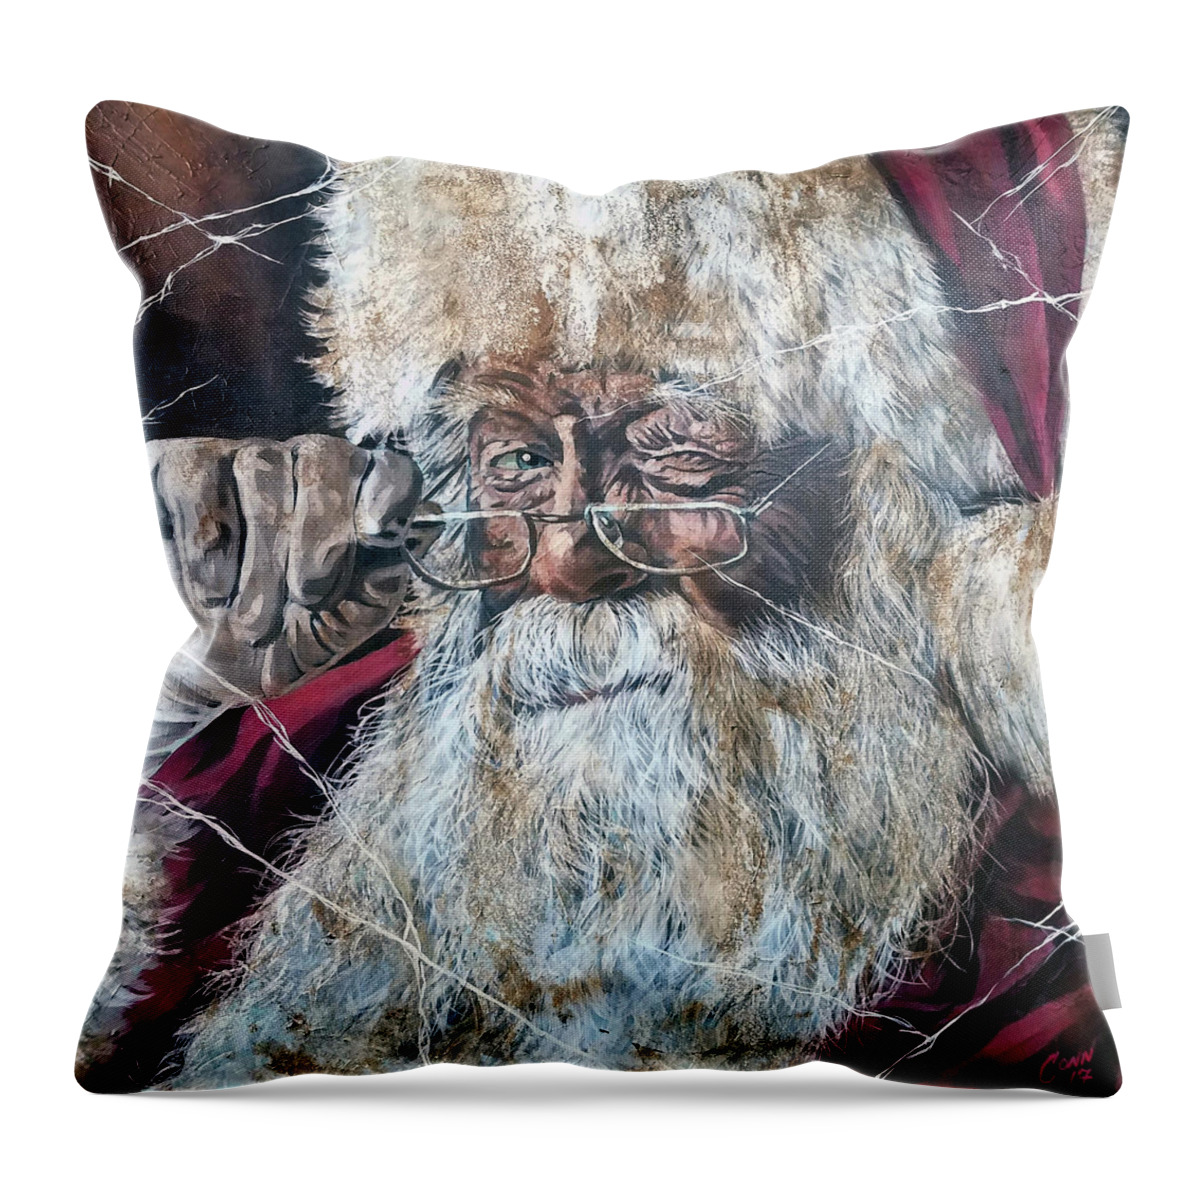 Santa Claus Throw Pillow featuring the painting Grandma's Christmas Eve Photo by Shawn Conn